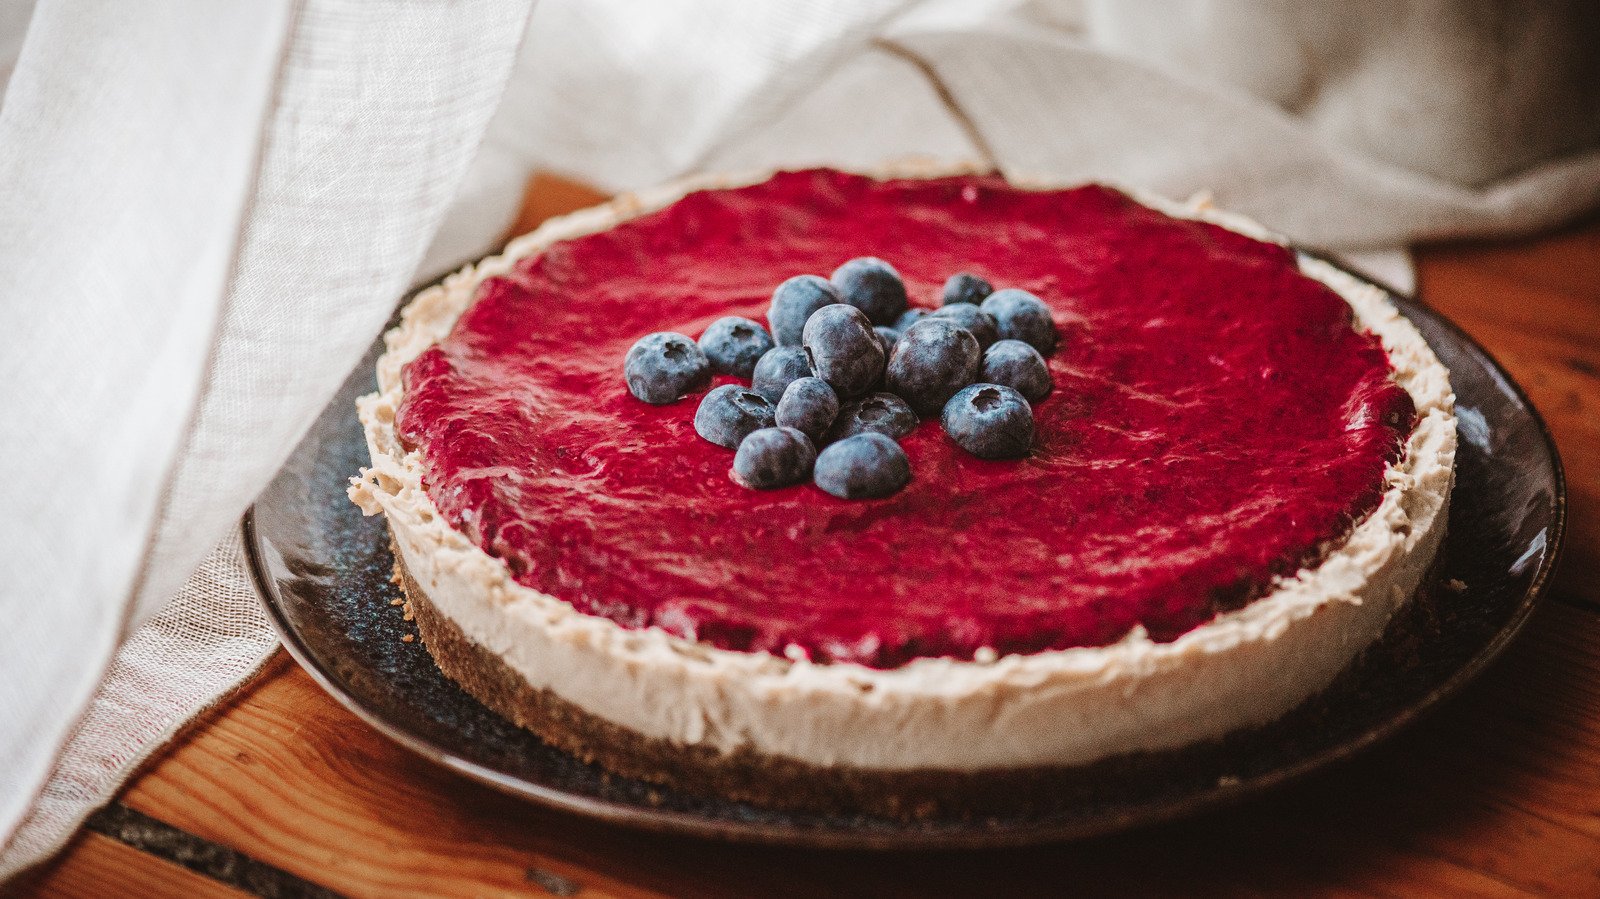 Cheesecake Crust Alternatives You Haven't Thought Of